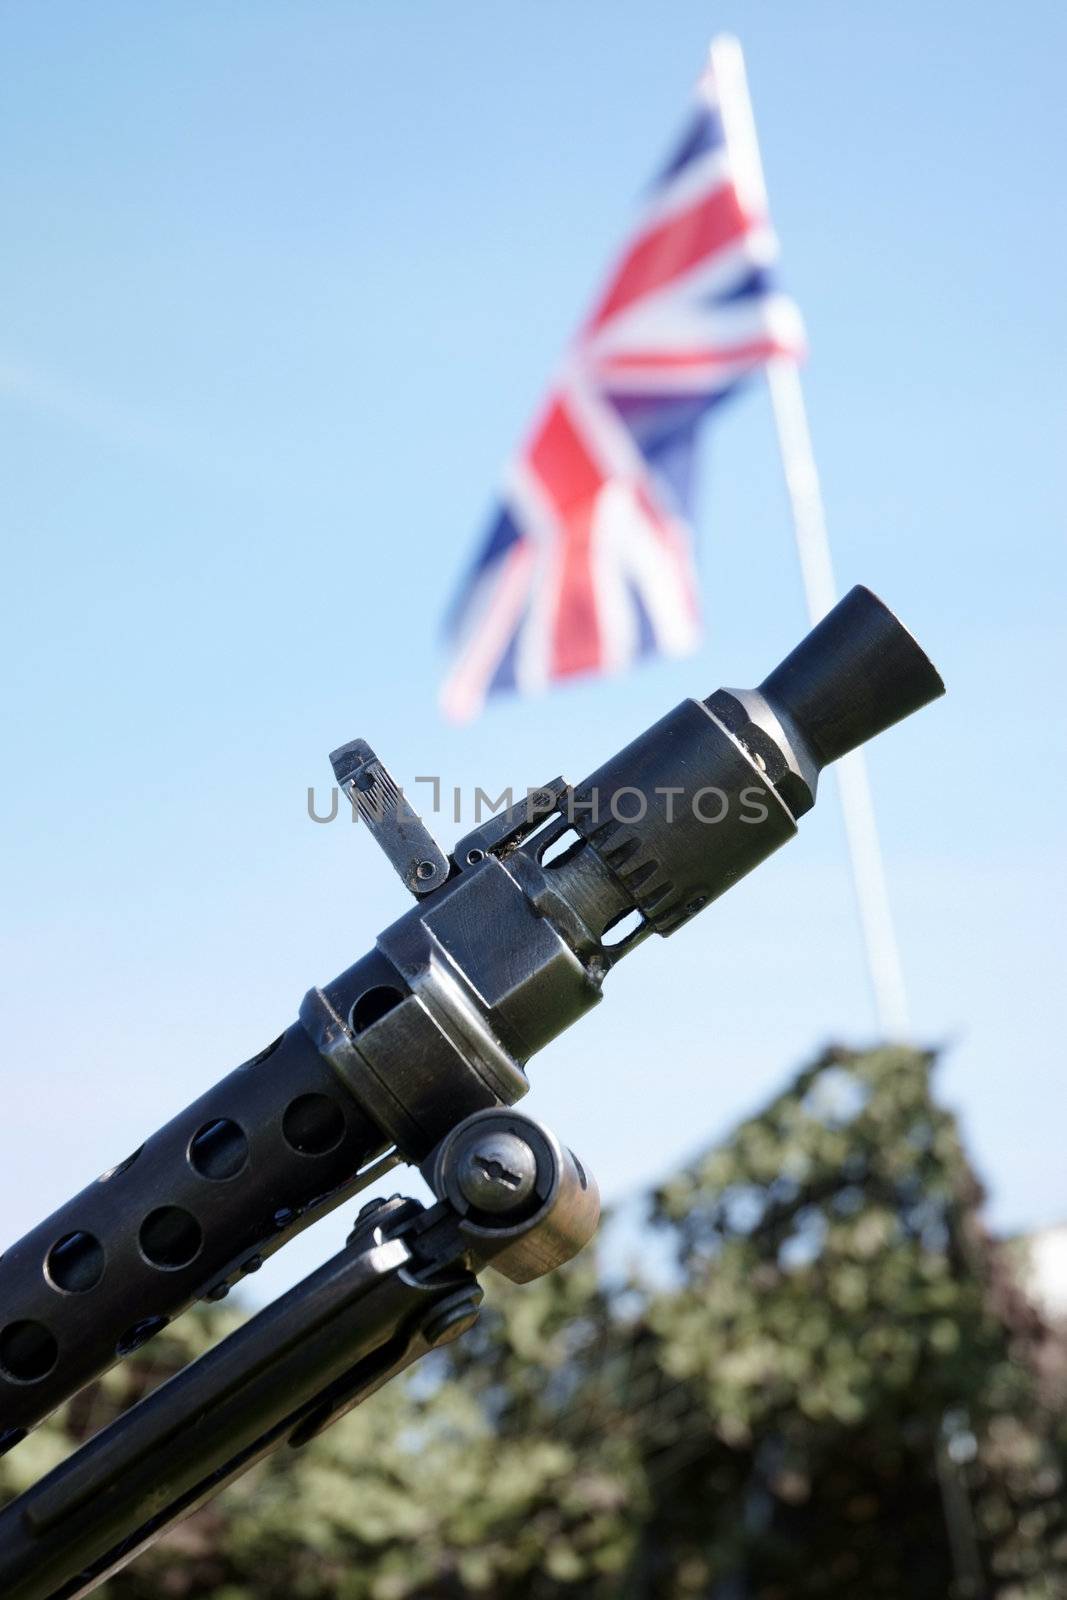 Machine gun used in the Second World War with the Union Jack flag in background